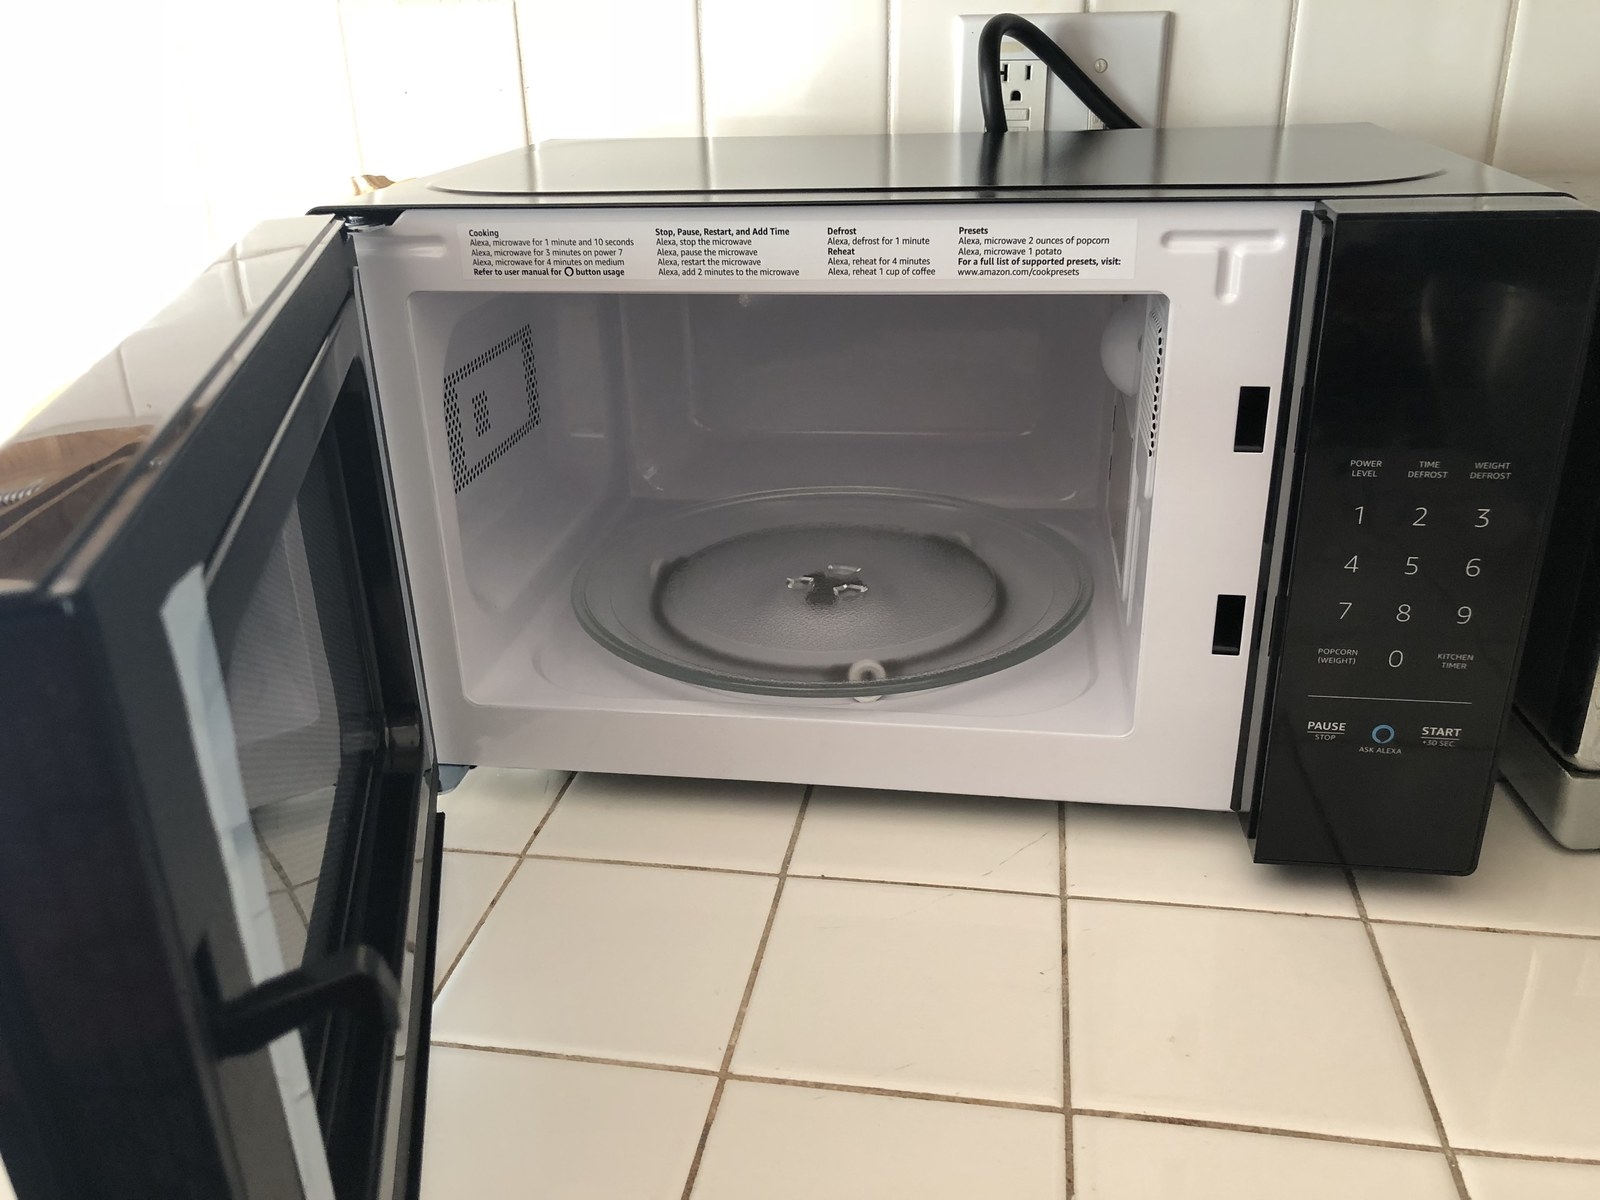 Amazonbasics Microwave Review The Voice Controlled Appliance Makes Life Marginally Better